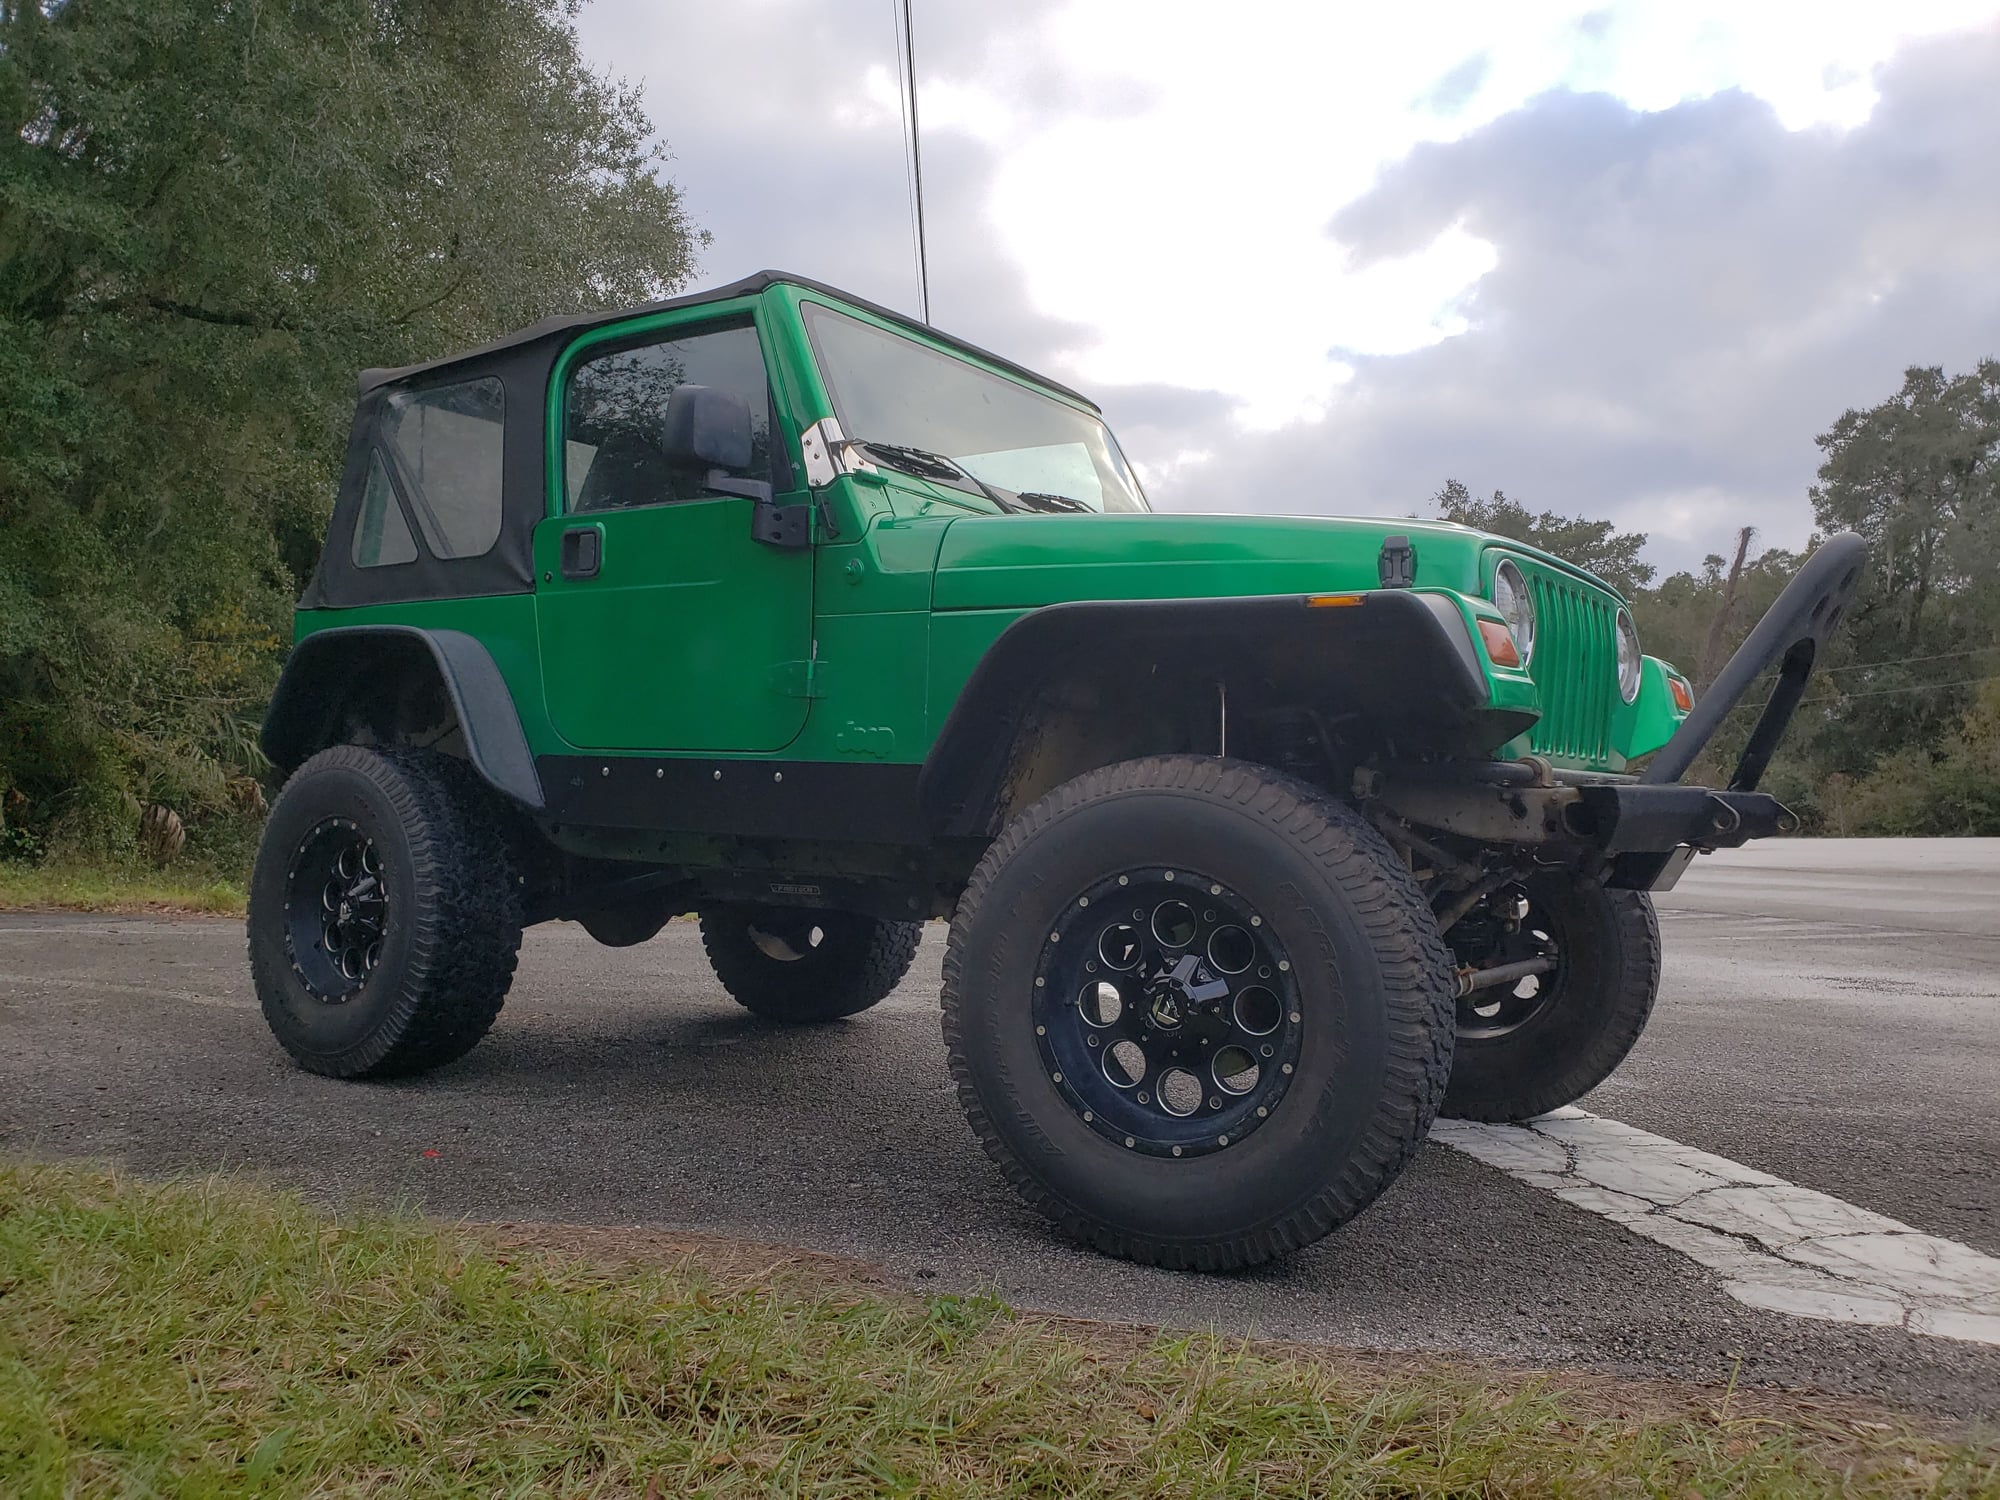 1999 Jeep TJ - 1999 Jeep Wrangler LS1 swapped daily driver - Used - VIN 1j4fy19s6xp431290 - 89,000 Miles - 8 cyl - 4WD - Manual - Other - Ocala, FL 34474, United States